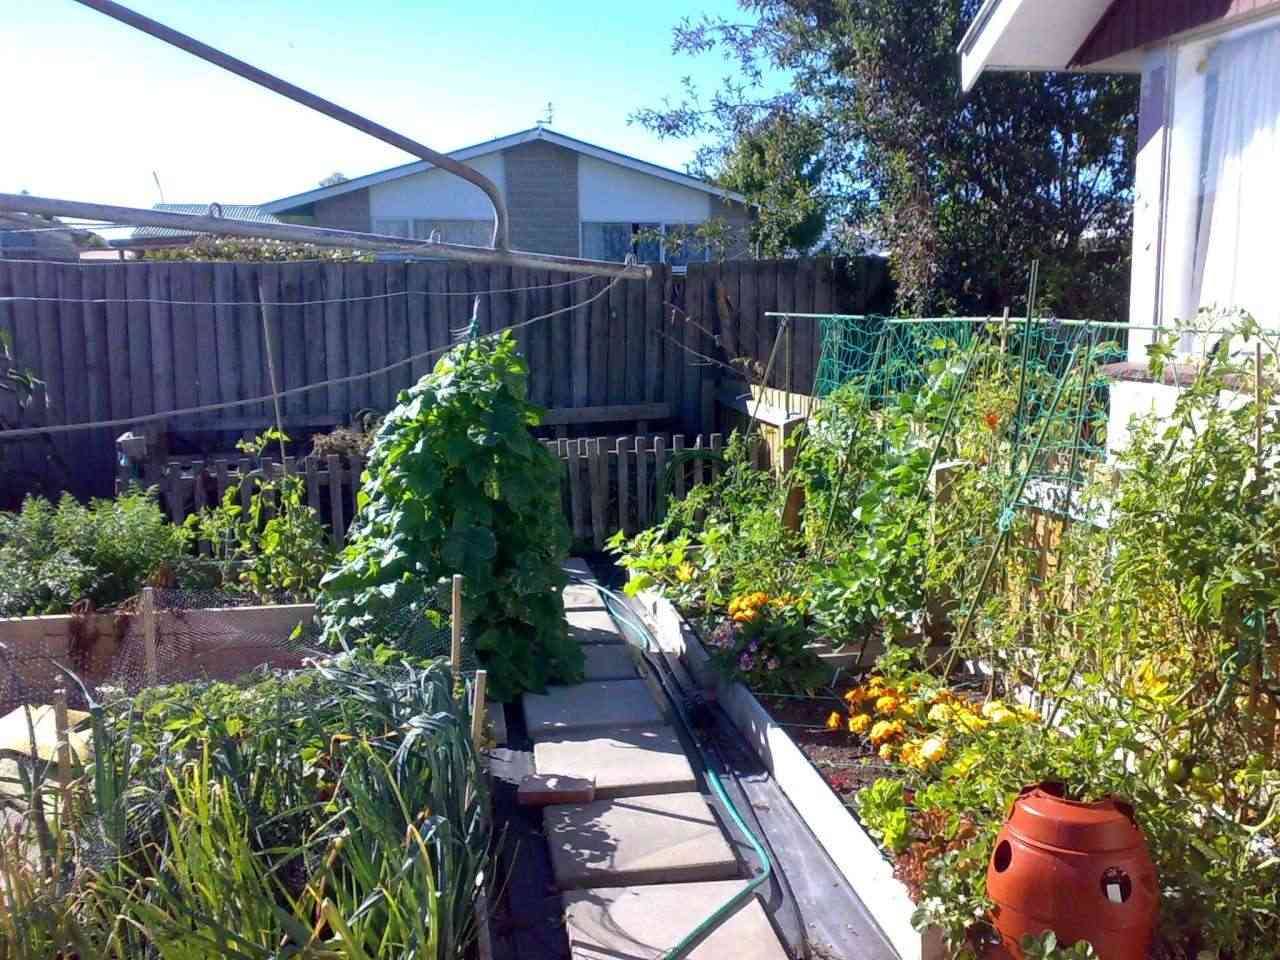 A New Zealand square foot garden 27022010